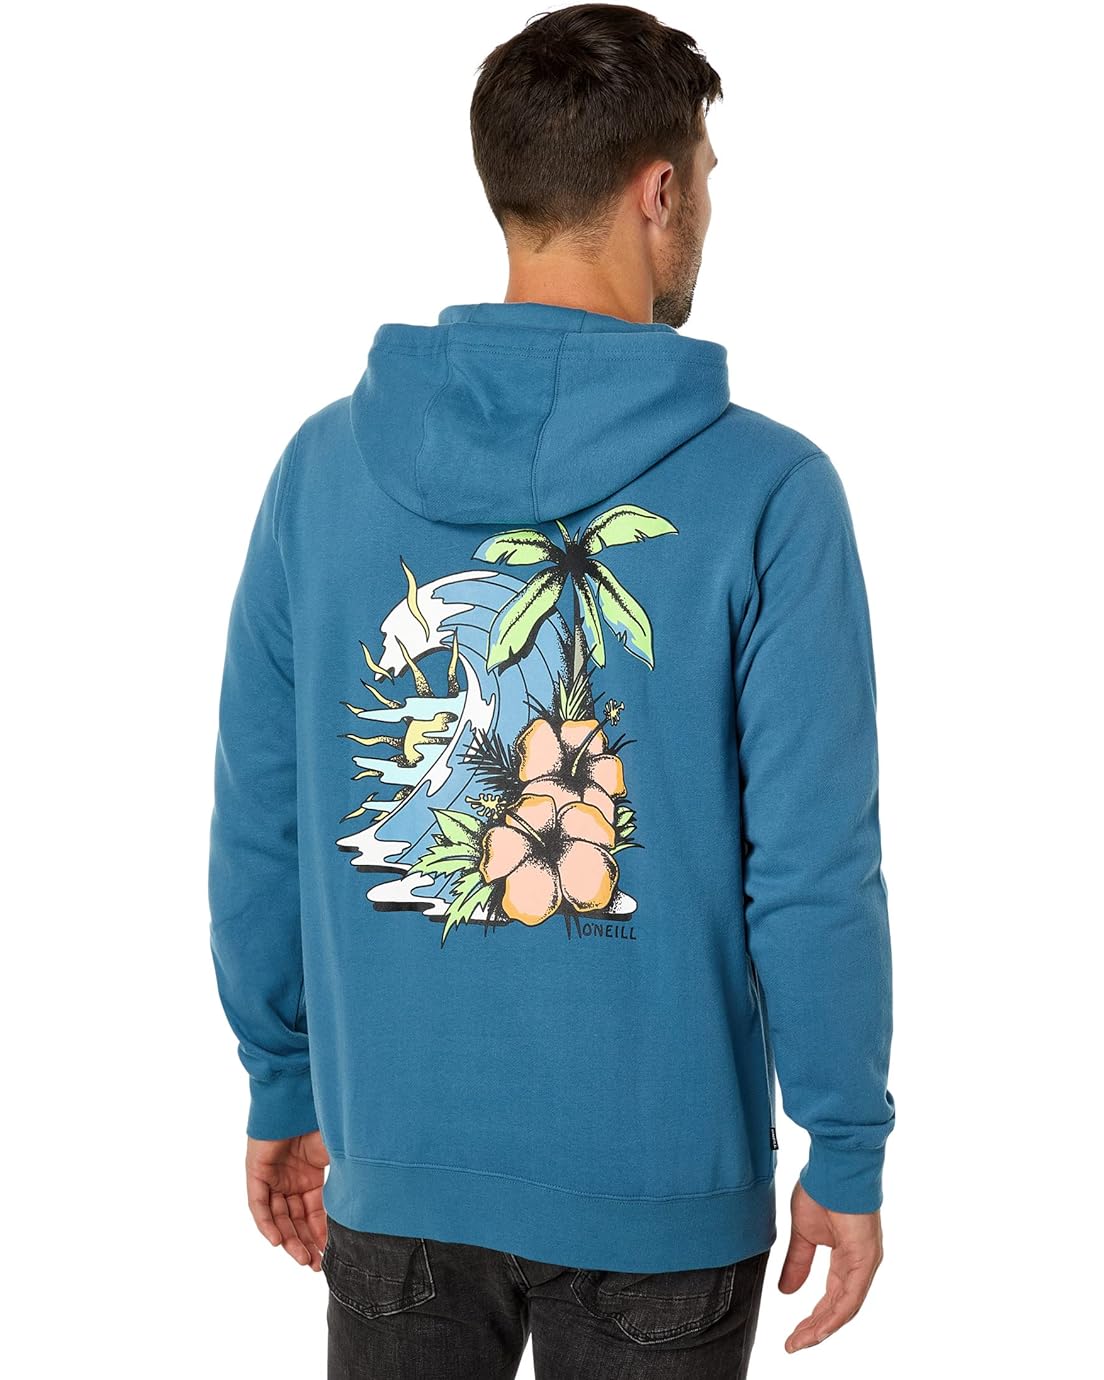 ONeill Fifty Two Scenic Pullover Hoodie